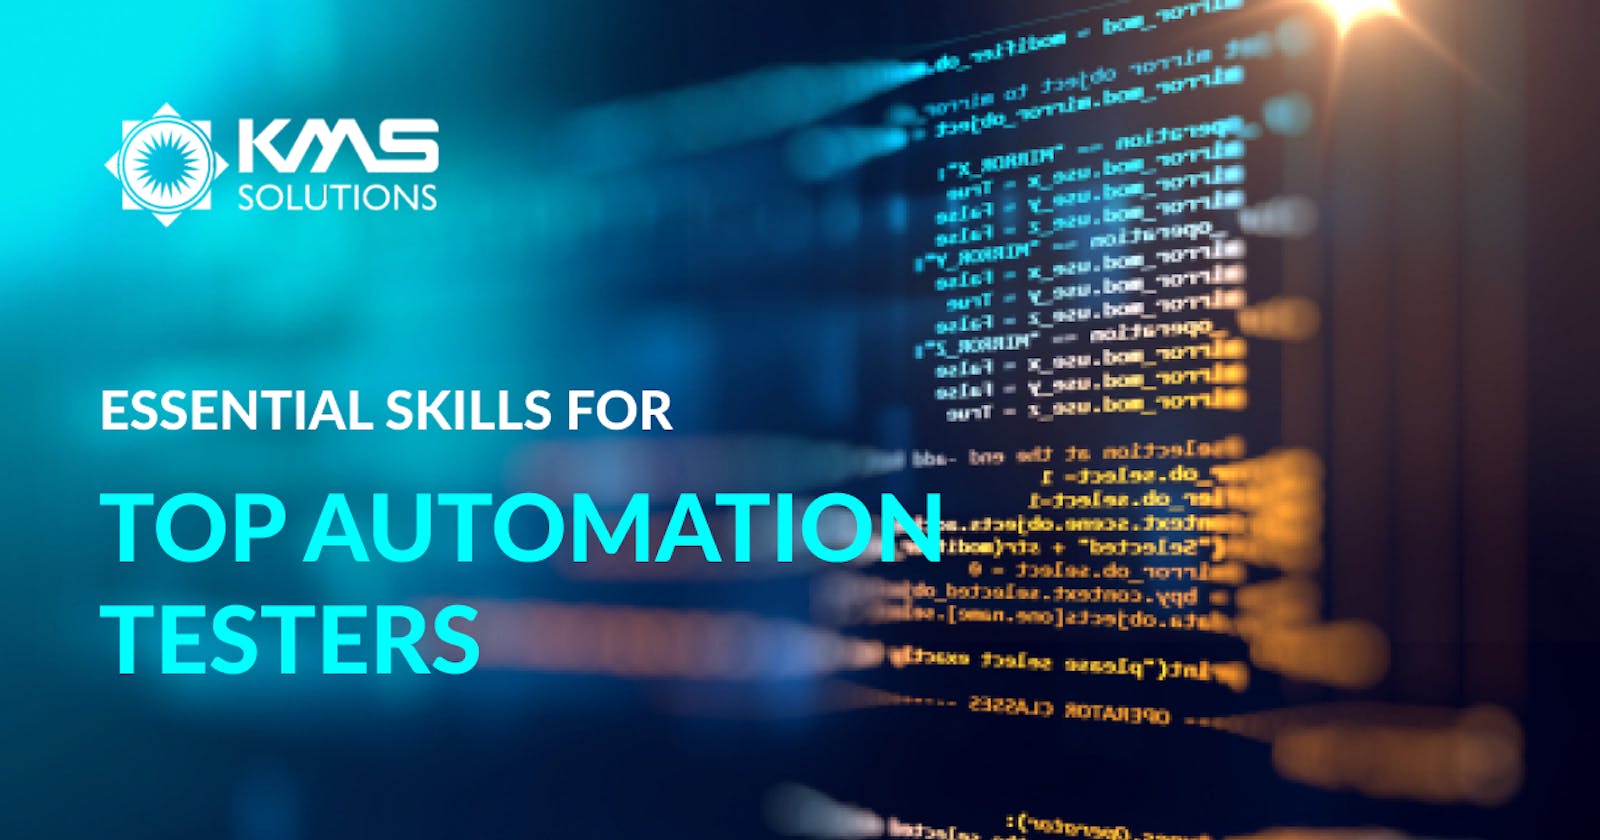 What Are Essential Skills For A Top Automation Tester?